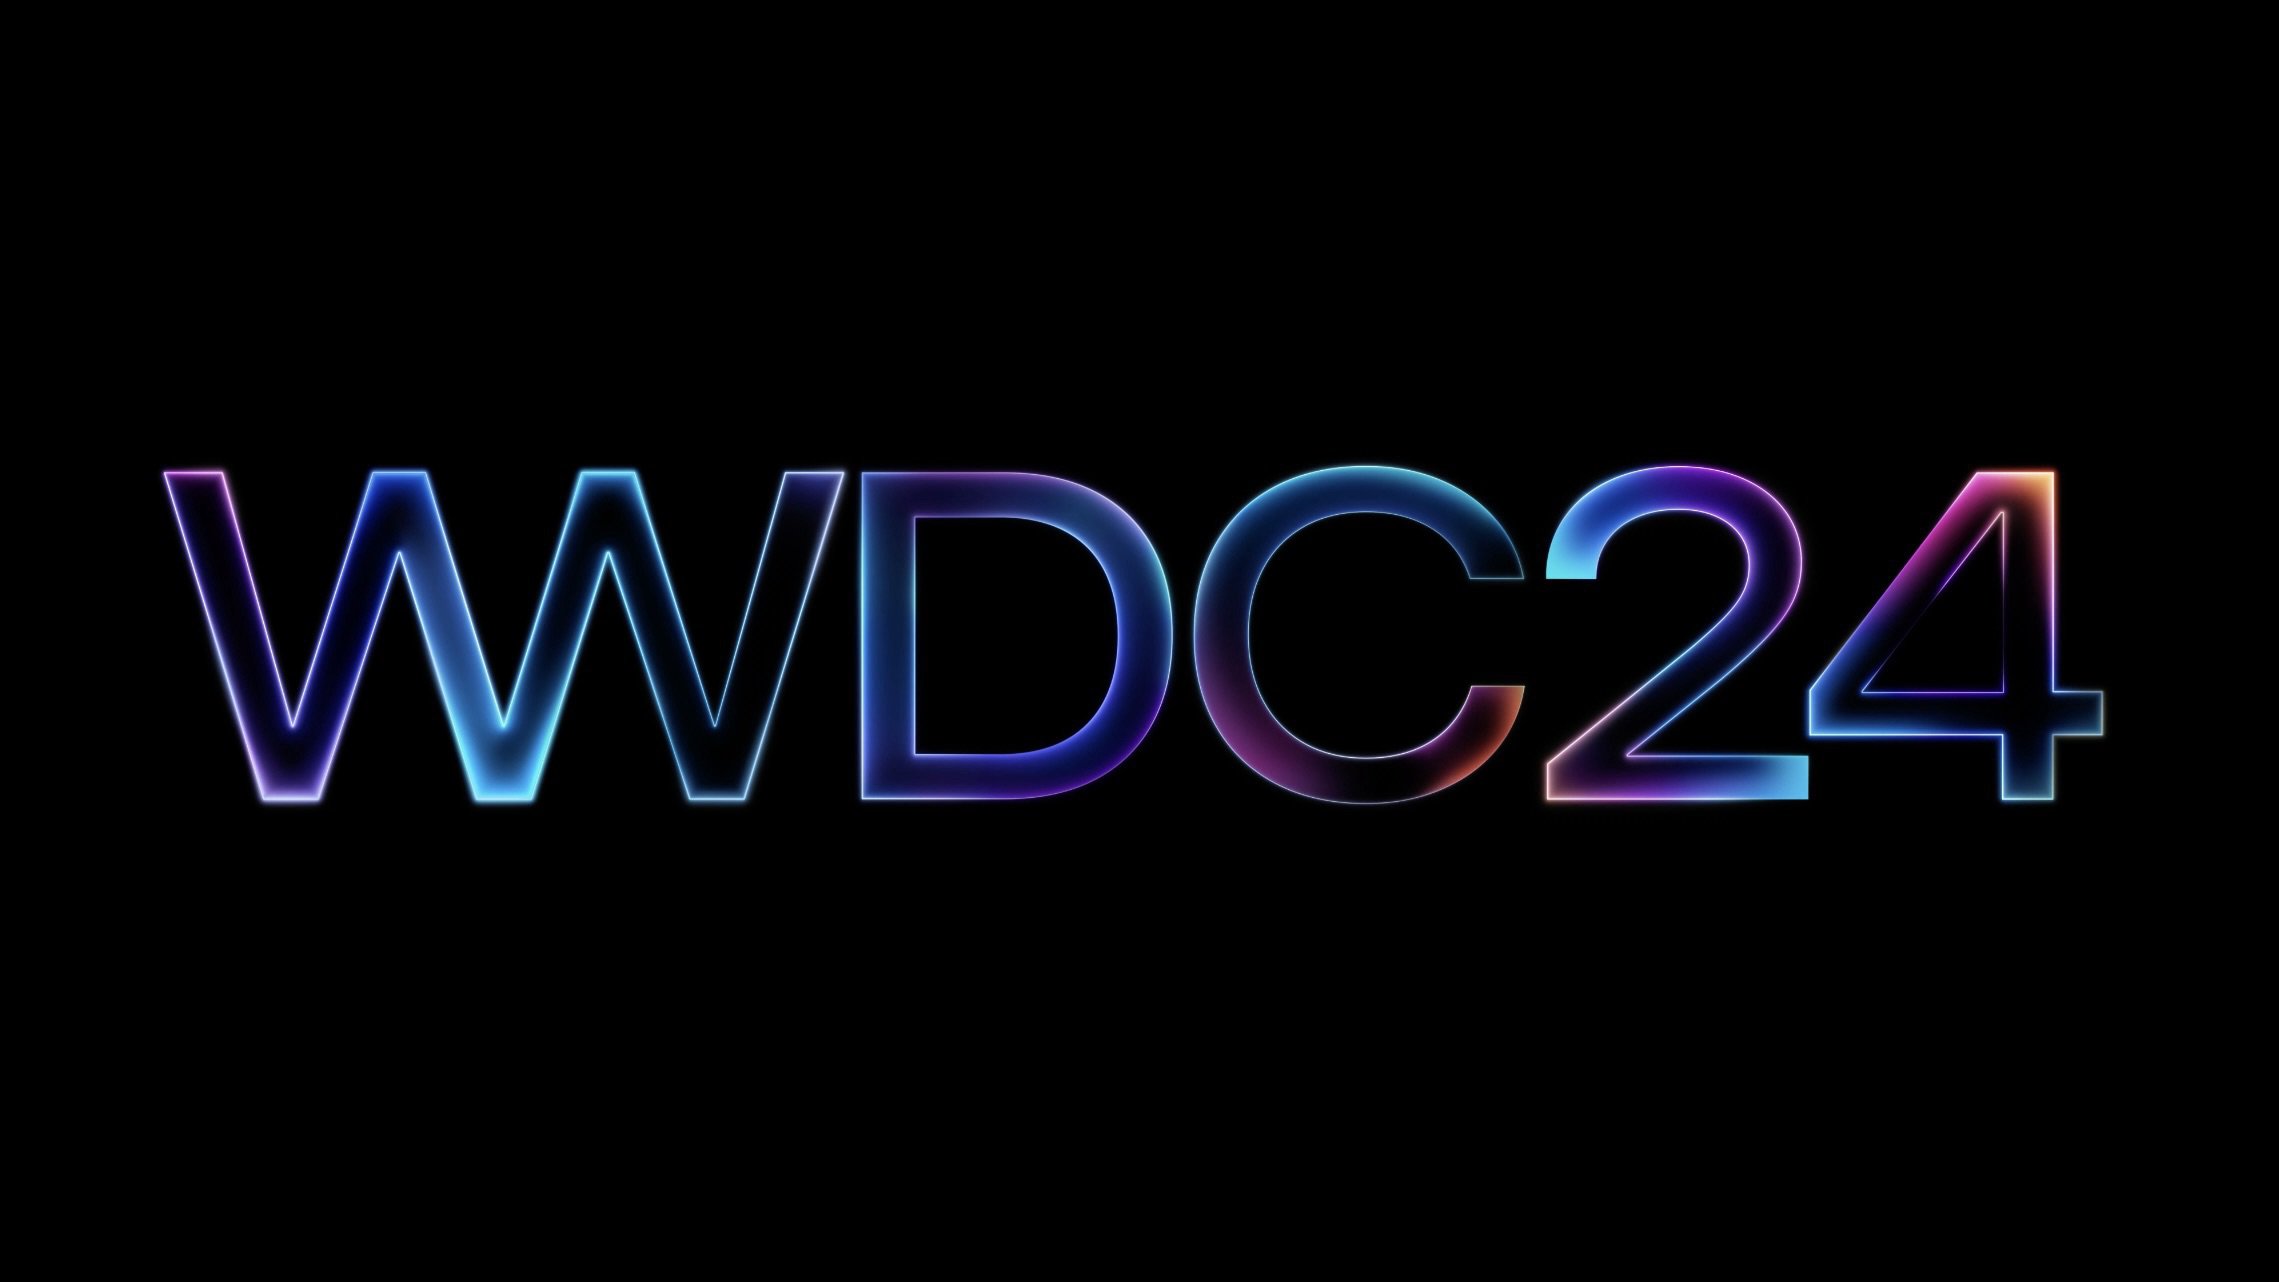 Screenshot of Apple's website showing with a colorful WWDC24 written on back background.